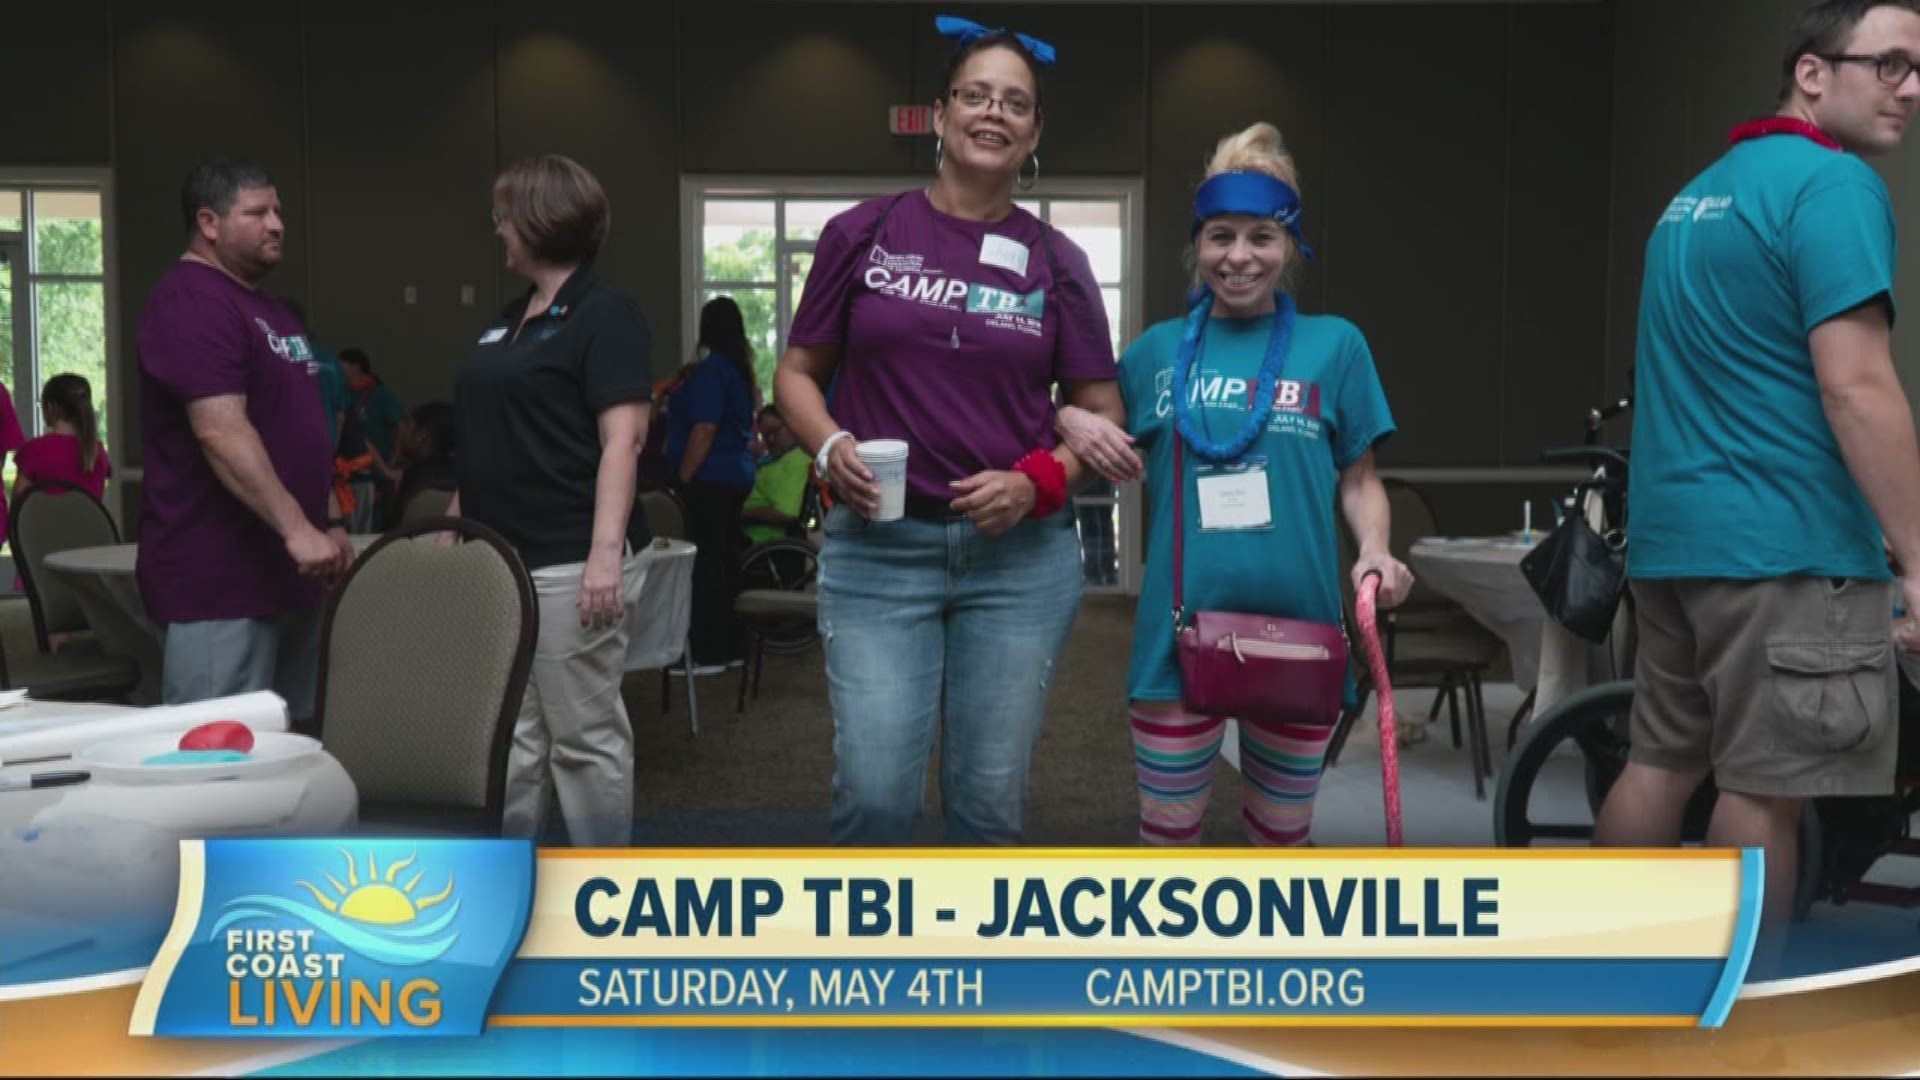 Camp TBI is a great resource to have if you are living with a brain injury.